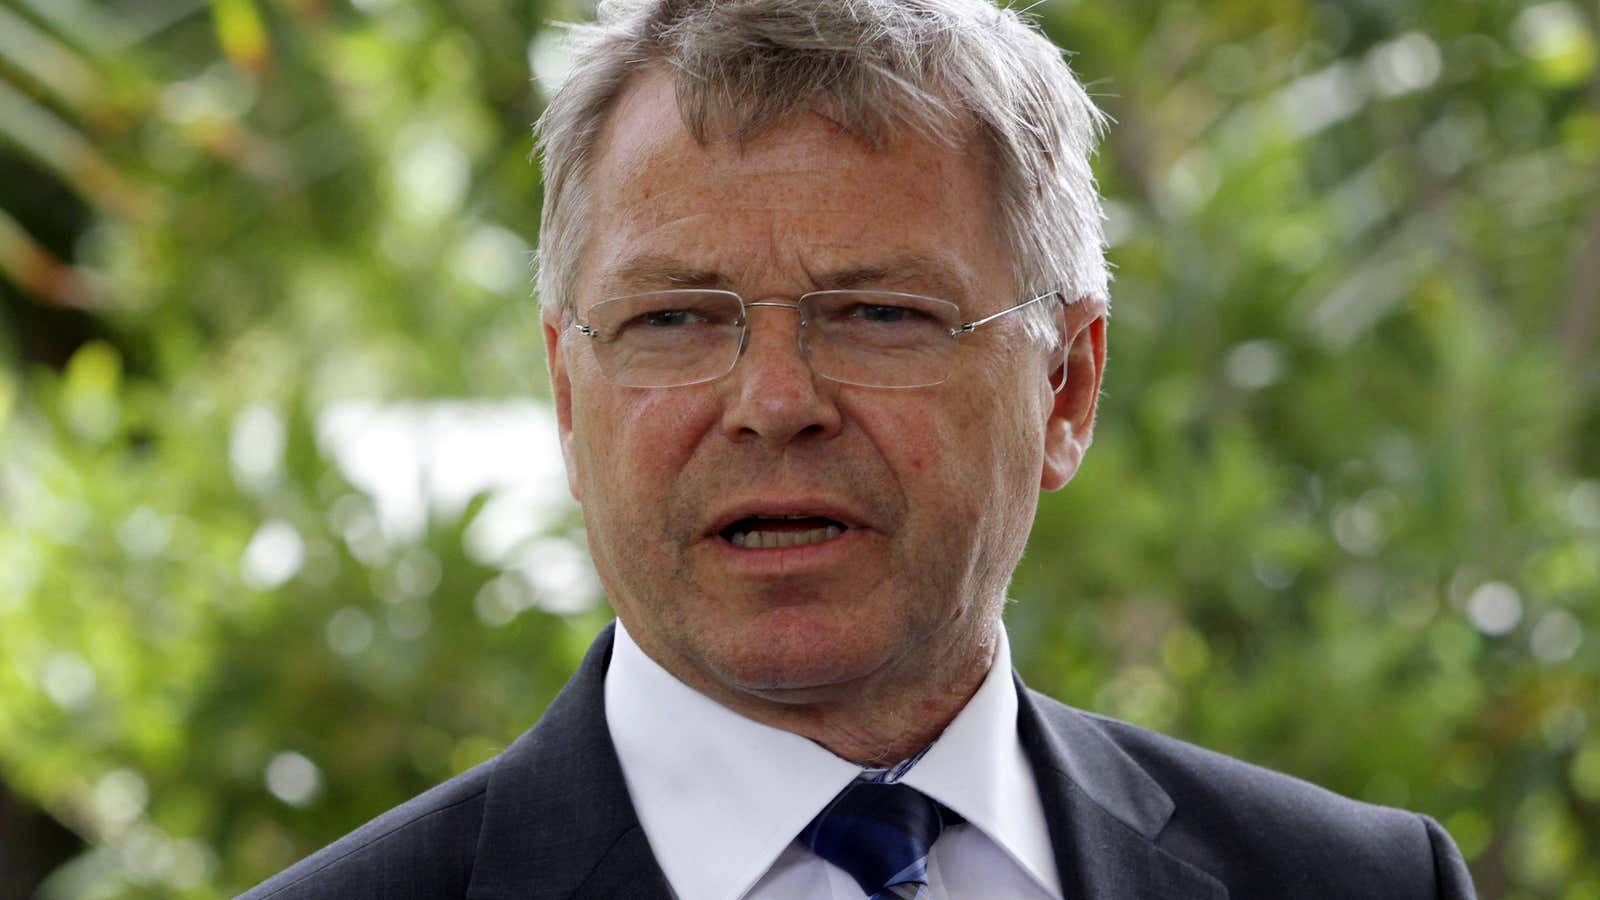 Former Norwegian prime minister Kjell Magne Bondevik is well-travelled. Maybe too well-travelled for current US immigration policy.